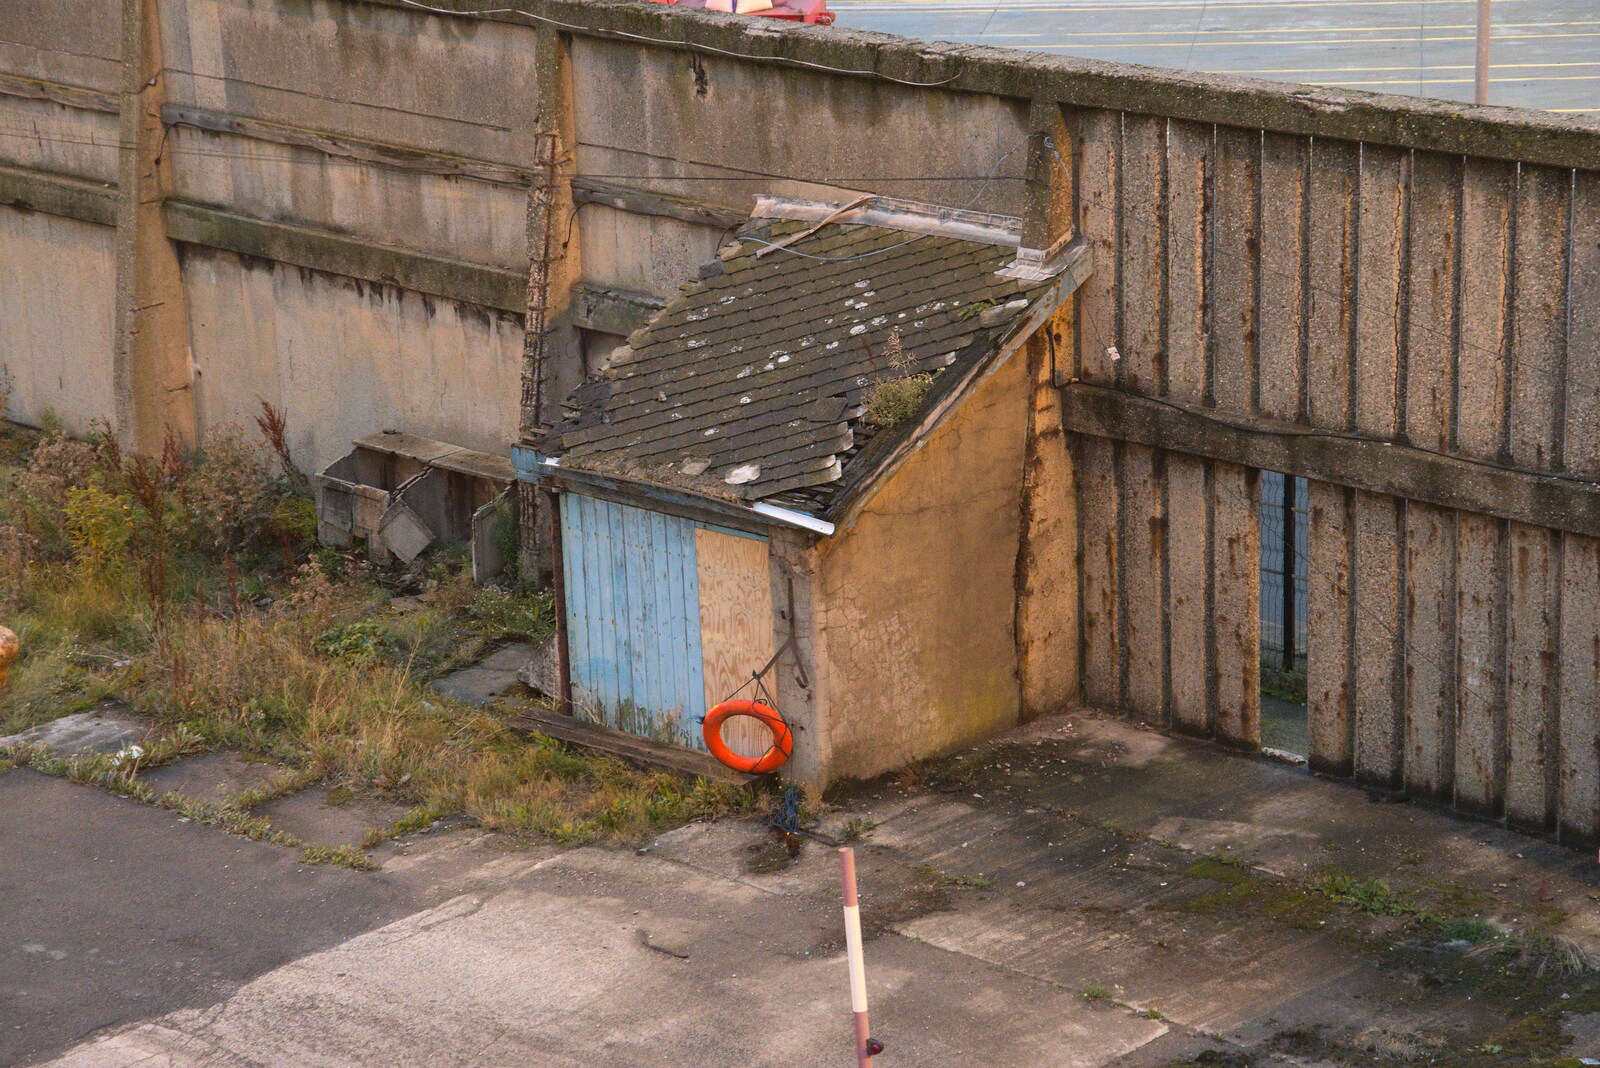 A curious hut on the dock from Pork Pies and Dockside Dereliction, Melton Mowbray and Liverpool - 7th August 2021